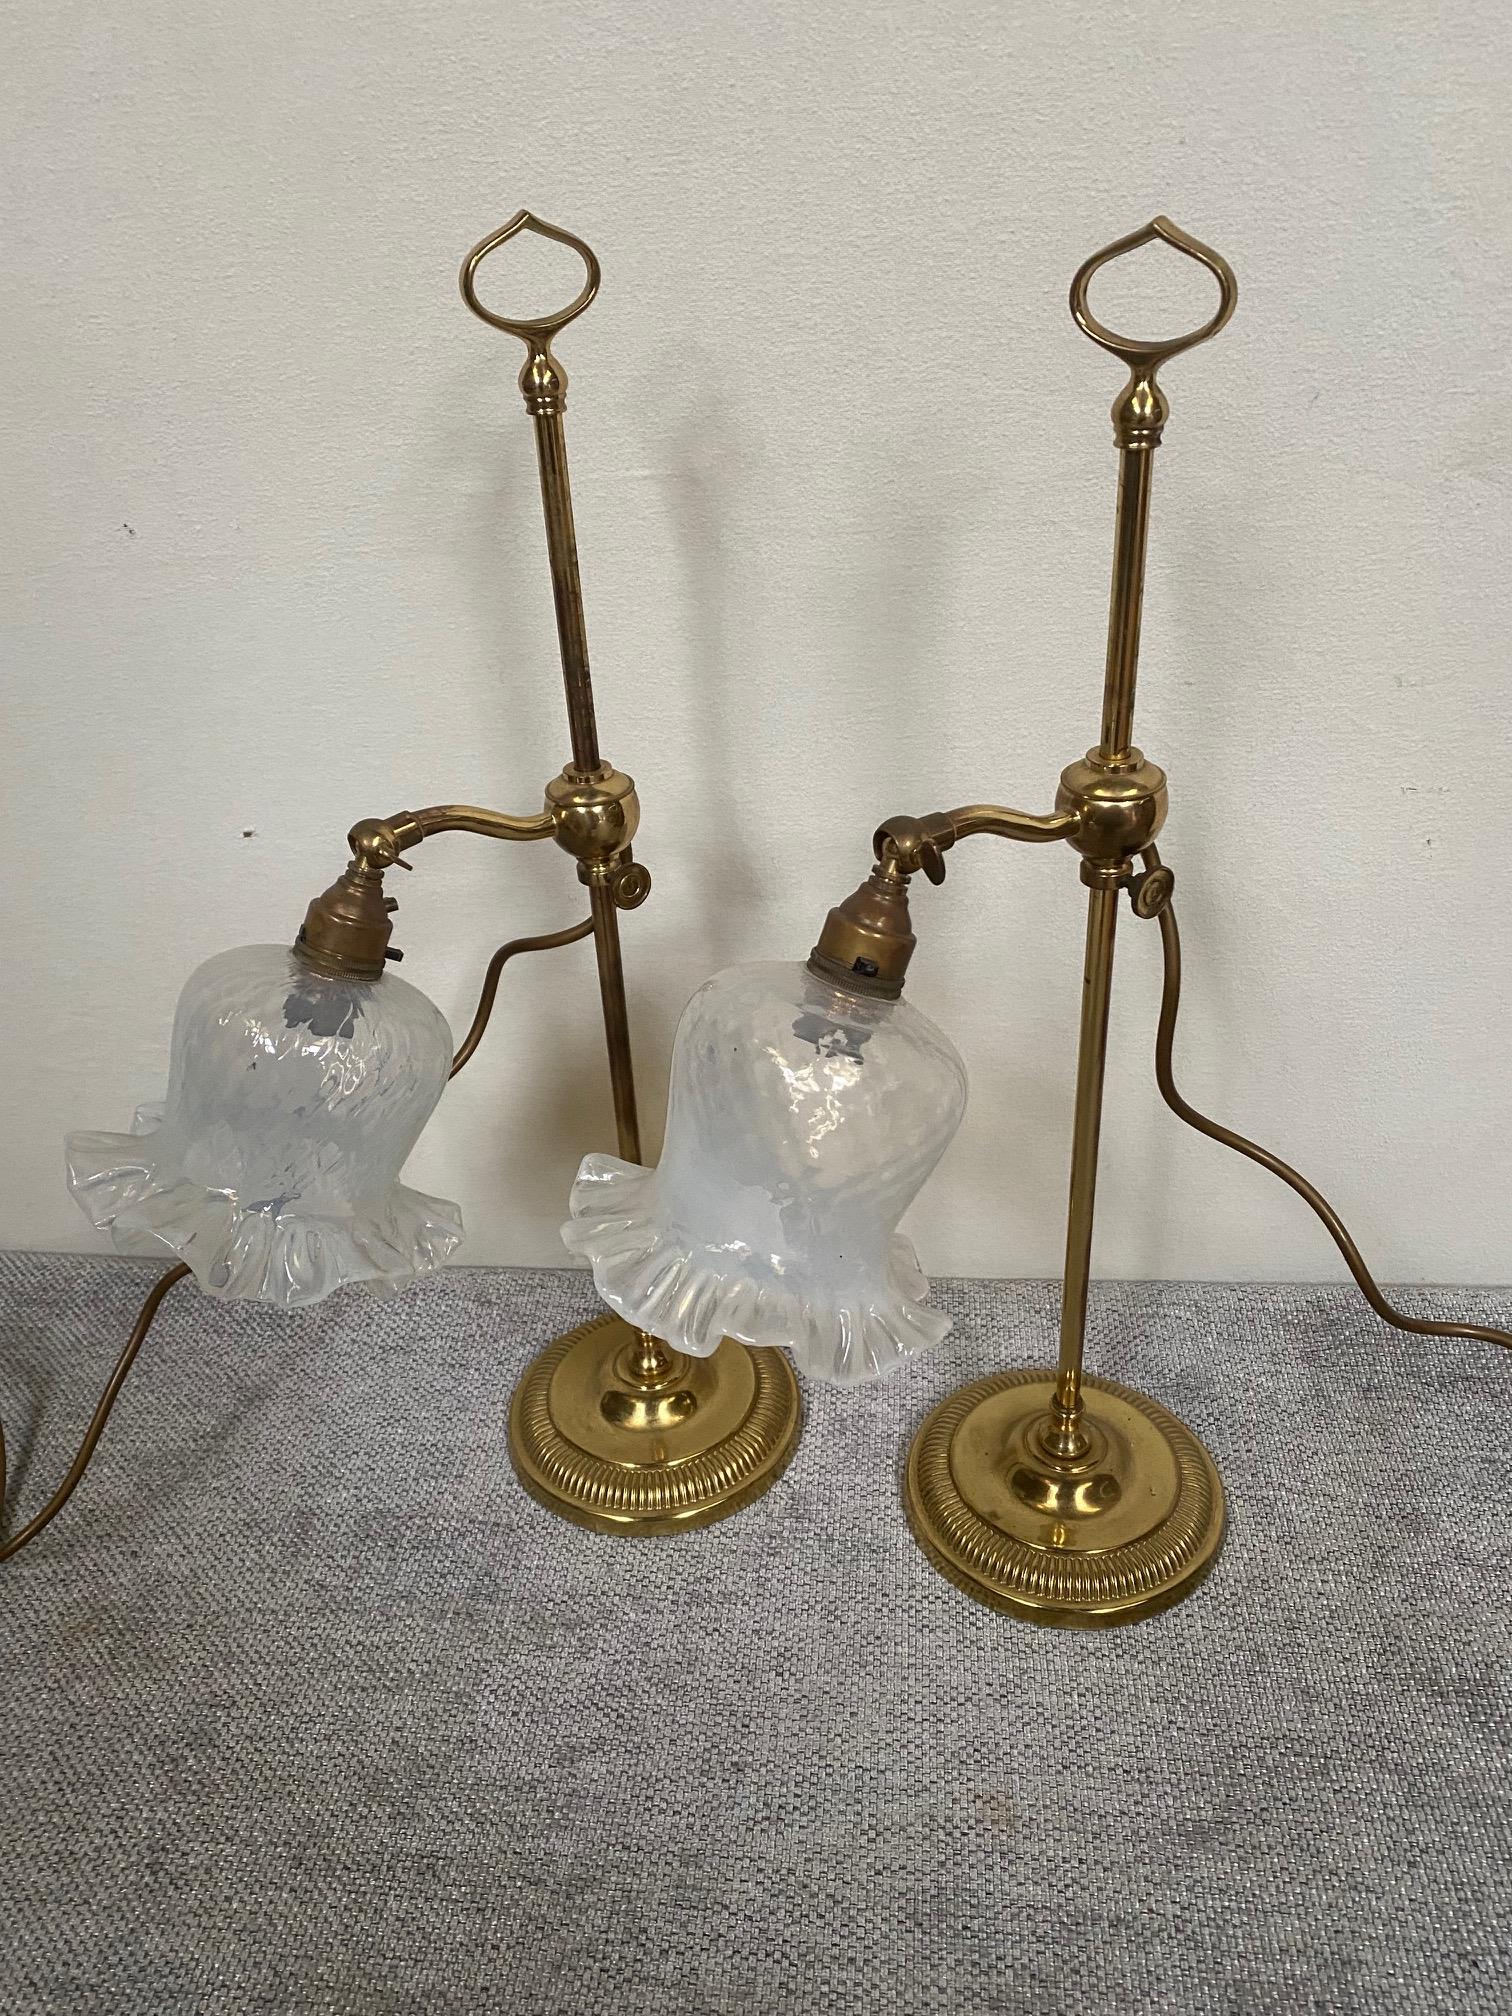 Pair of brass adjustable table lamps with glass tulip shades {55 cm H}. - Image 7 of 7